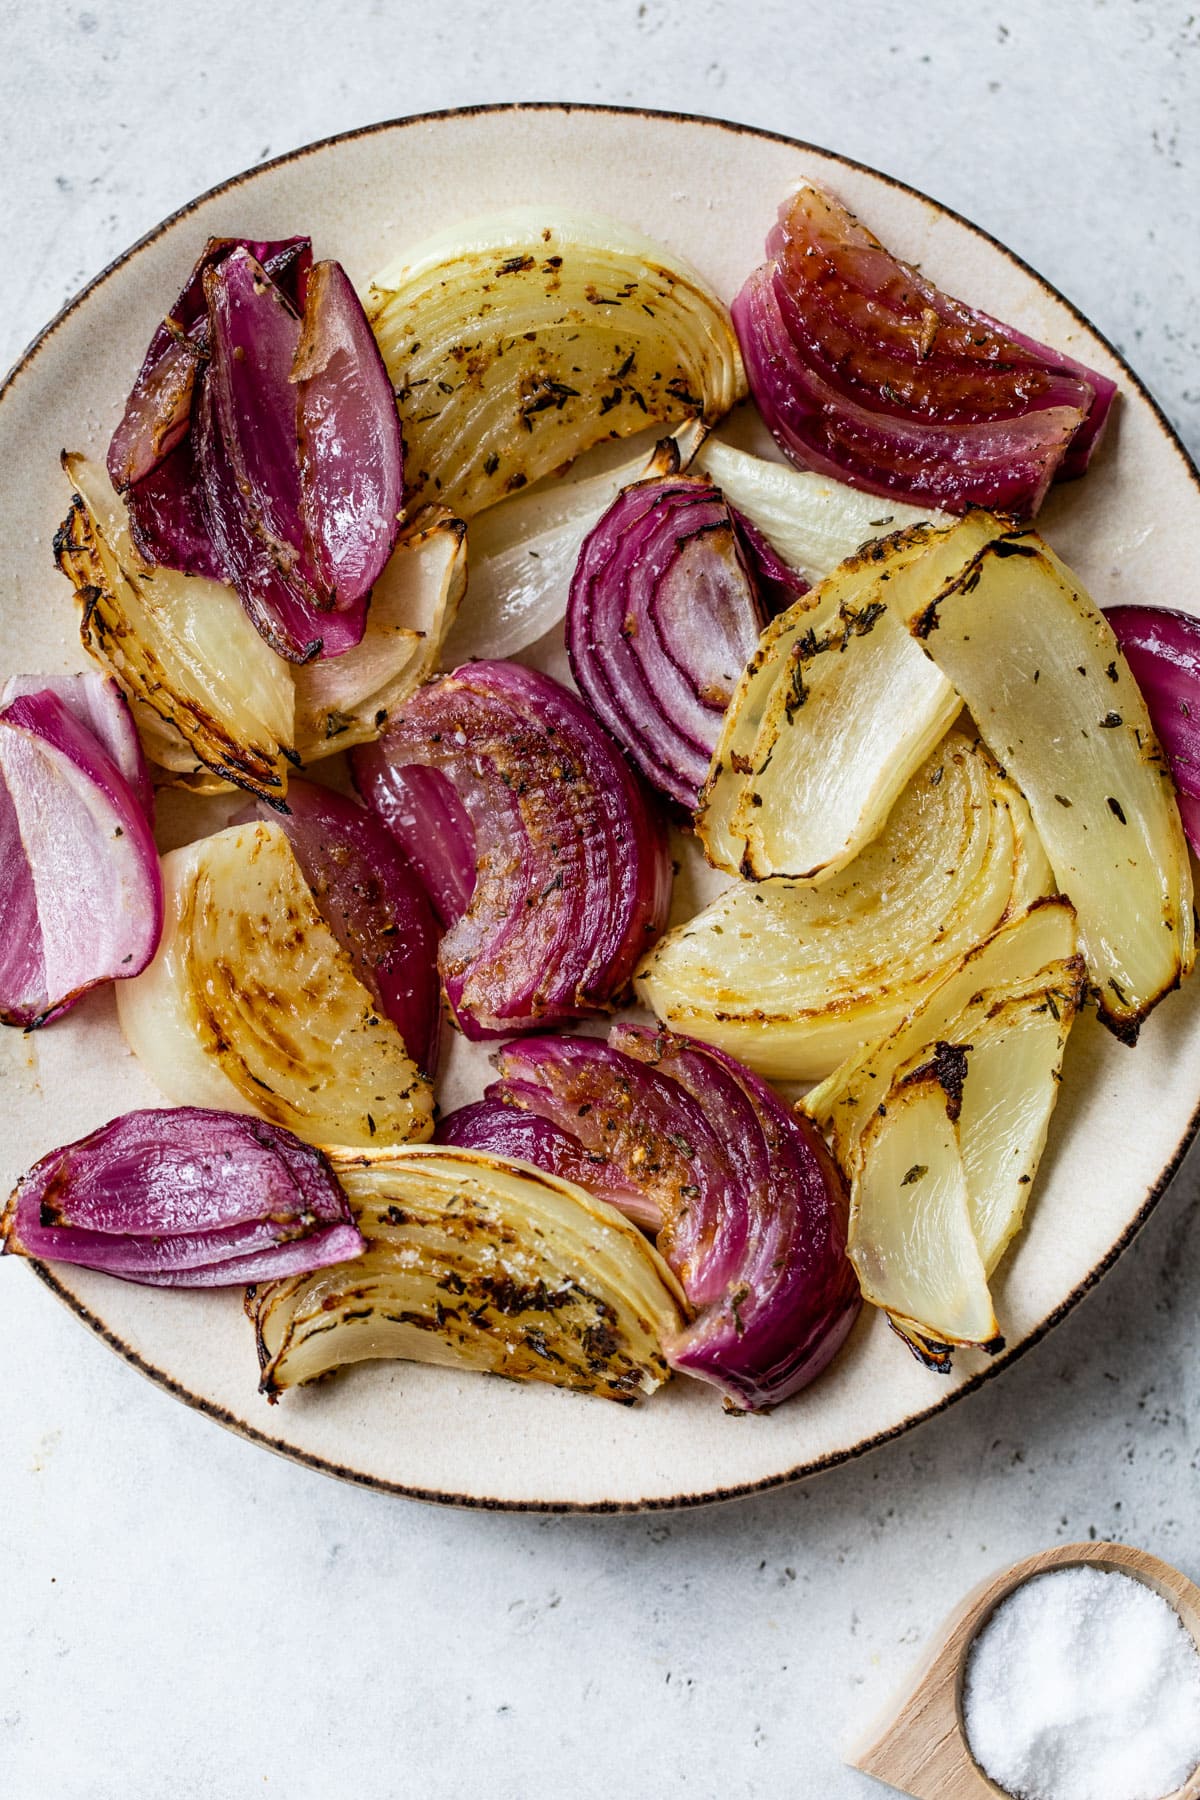 Roasted Onions: A Versatile Side Dish for Any Meal